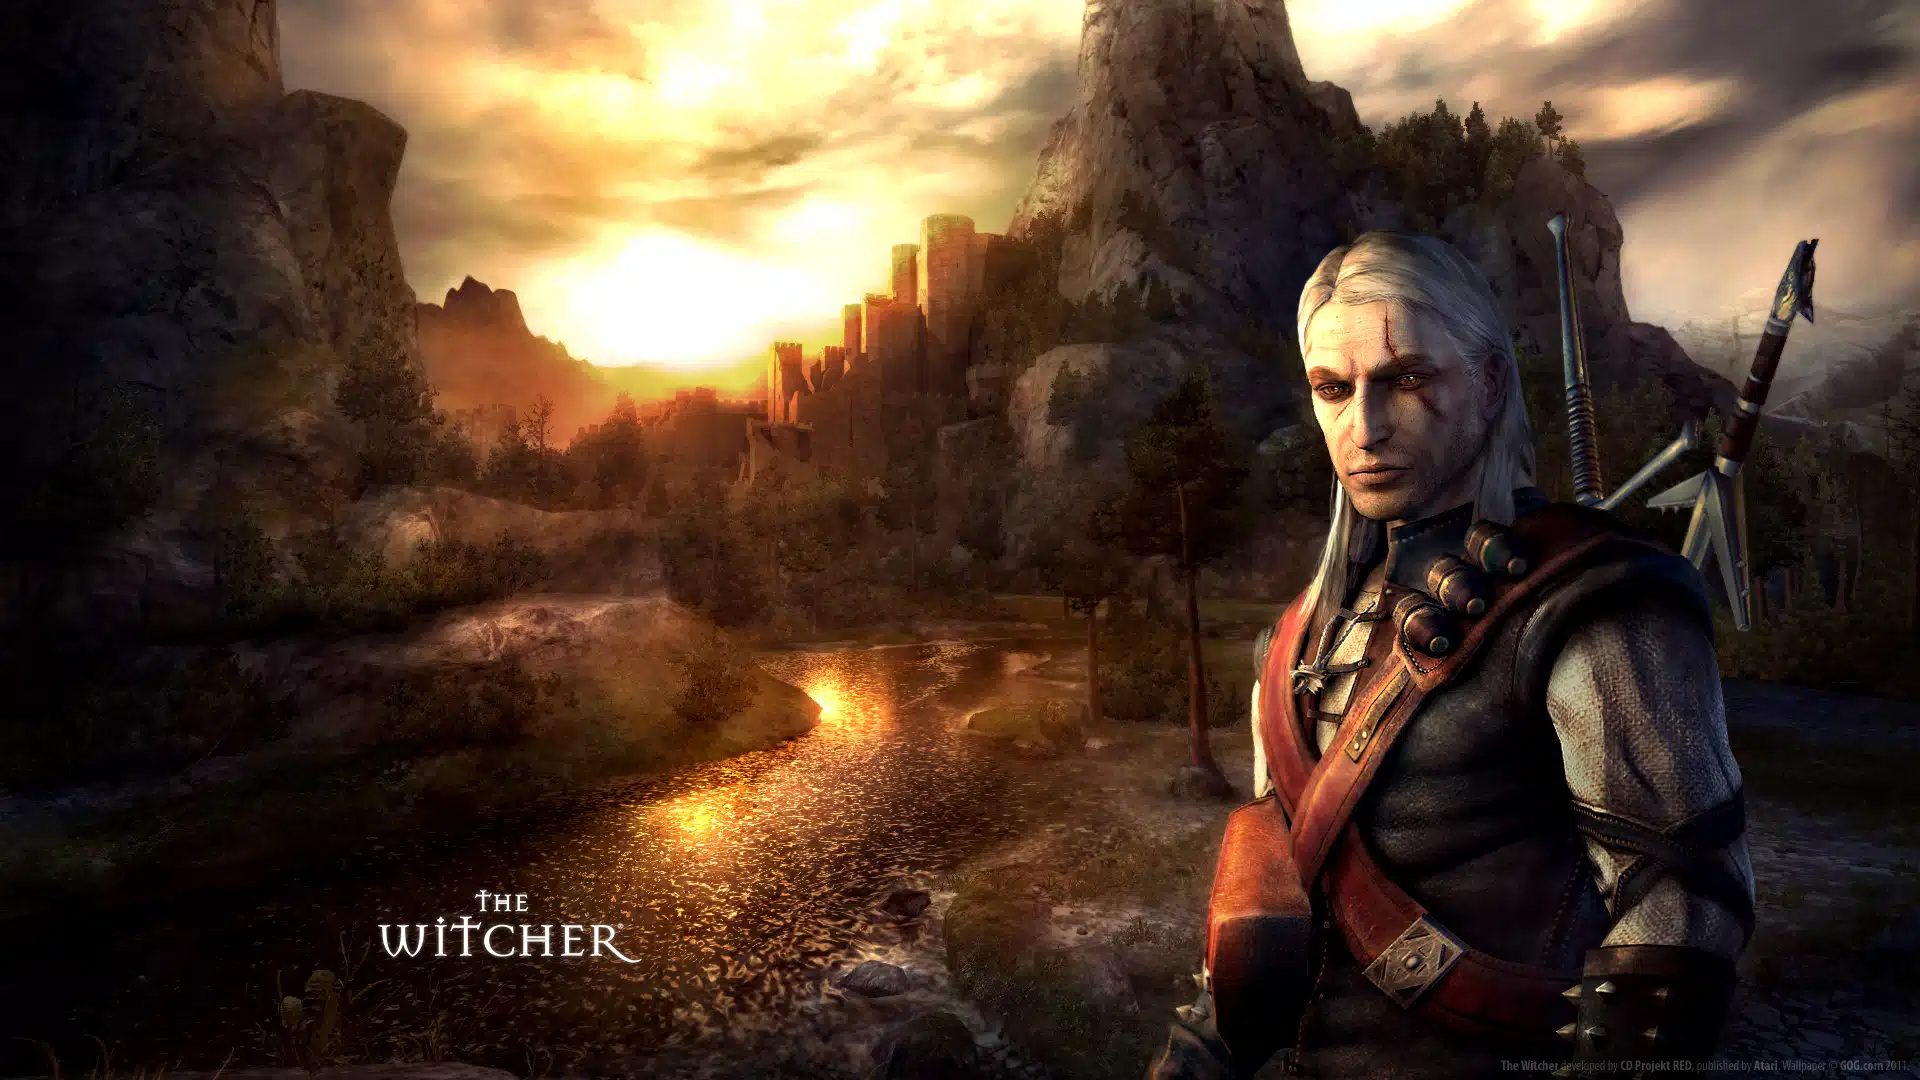 A brief mention of The Witcher remake in their Q3 earnings report reveals that it's going to be open-world. #url#